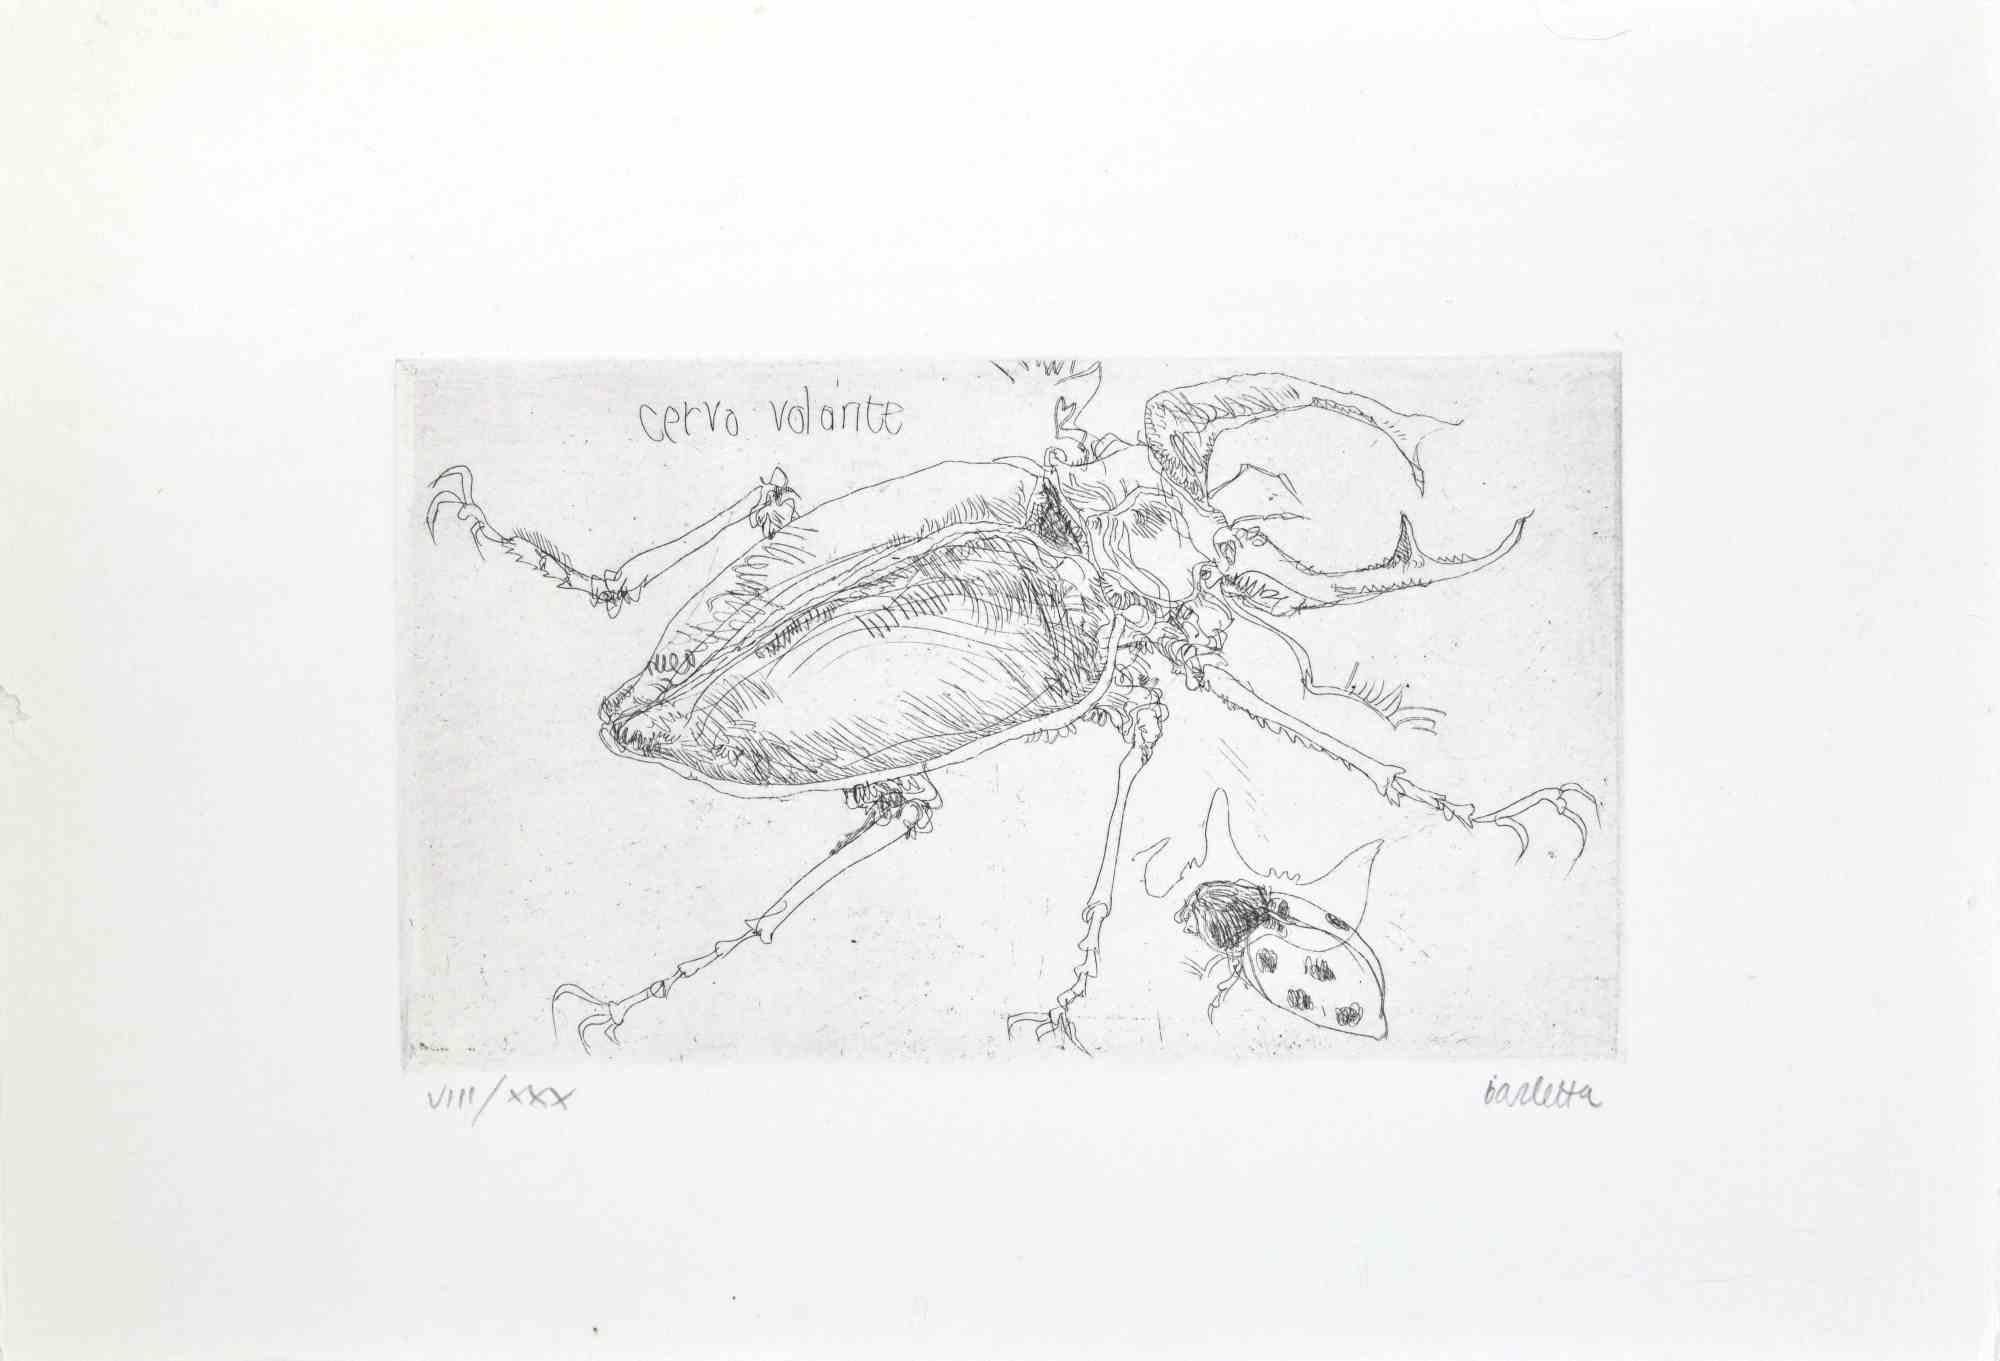 Insects  is an etching realized by  Sergio Barletta in 1974.

Hand-signed in pencil on the lower right. Numbered on the lower left in Roman numerals, from the edition of XXX prints.

Titled in Italian at the top left  "Cervo Volante".

Edition